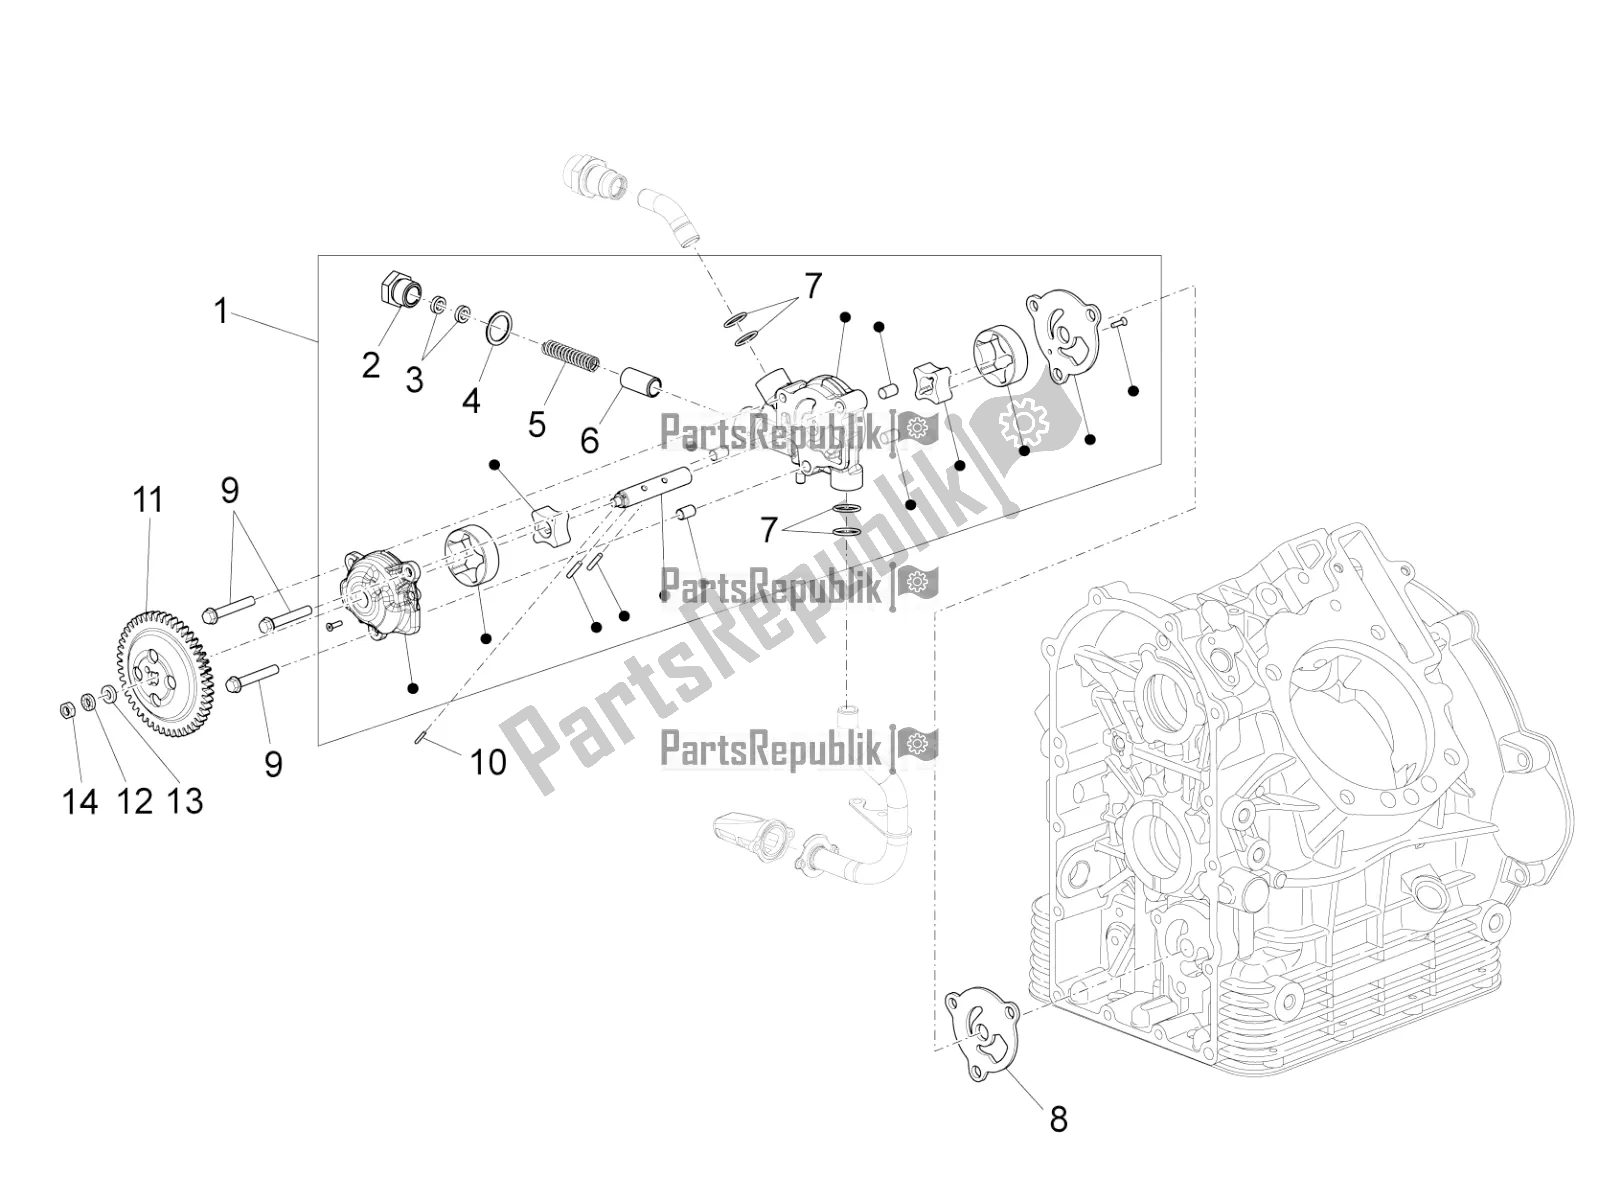 All parts for the Oil Pump of the Moto-Guzzi MGX 21 Flying Fortress 1400 ABS 2019